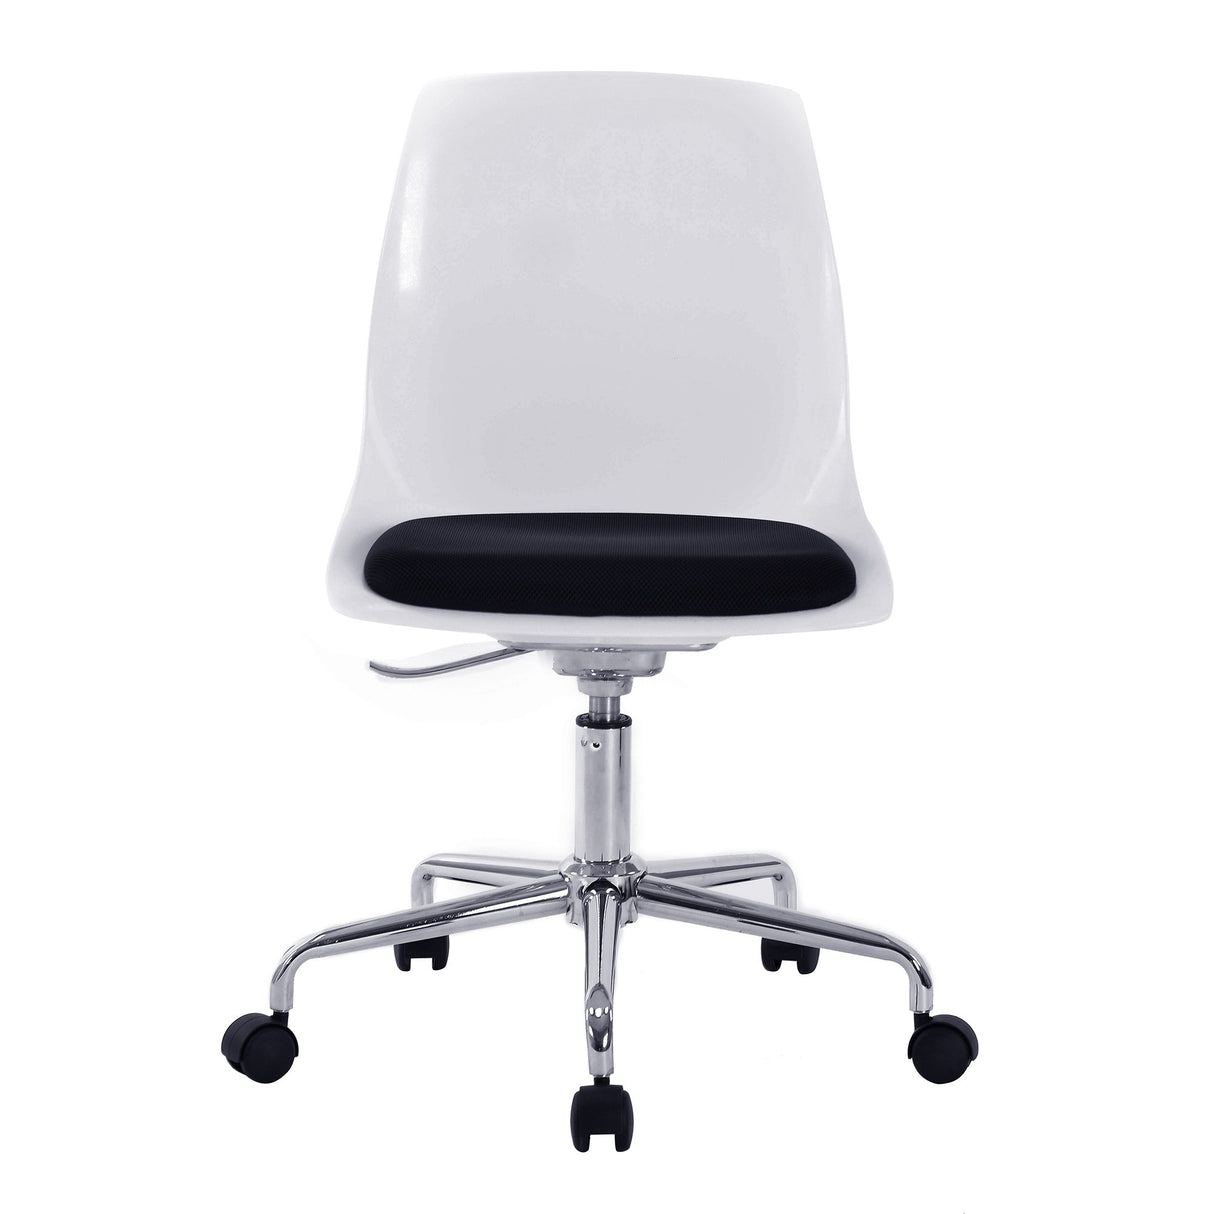 Nautilus Designs Flow Designer Poly Swivel Chair with White Shell and Chrome Base